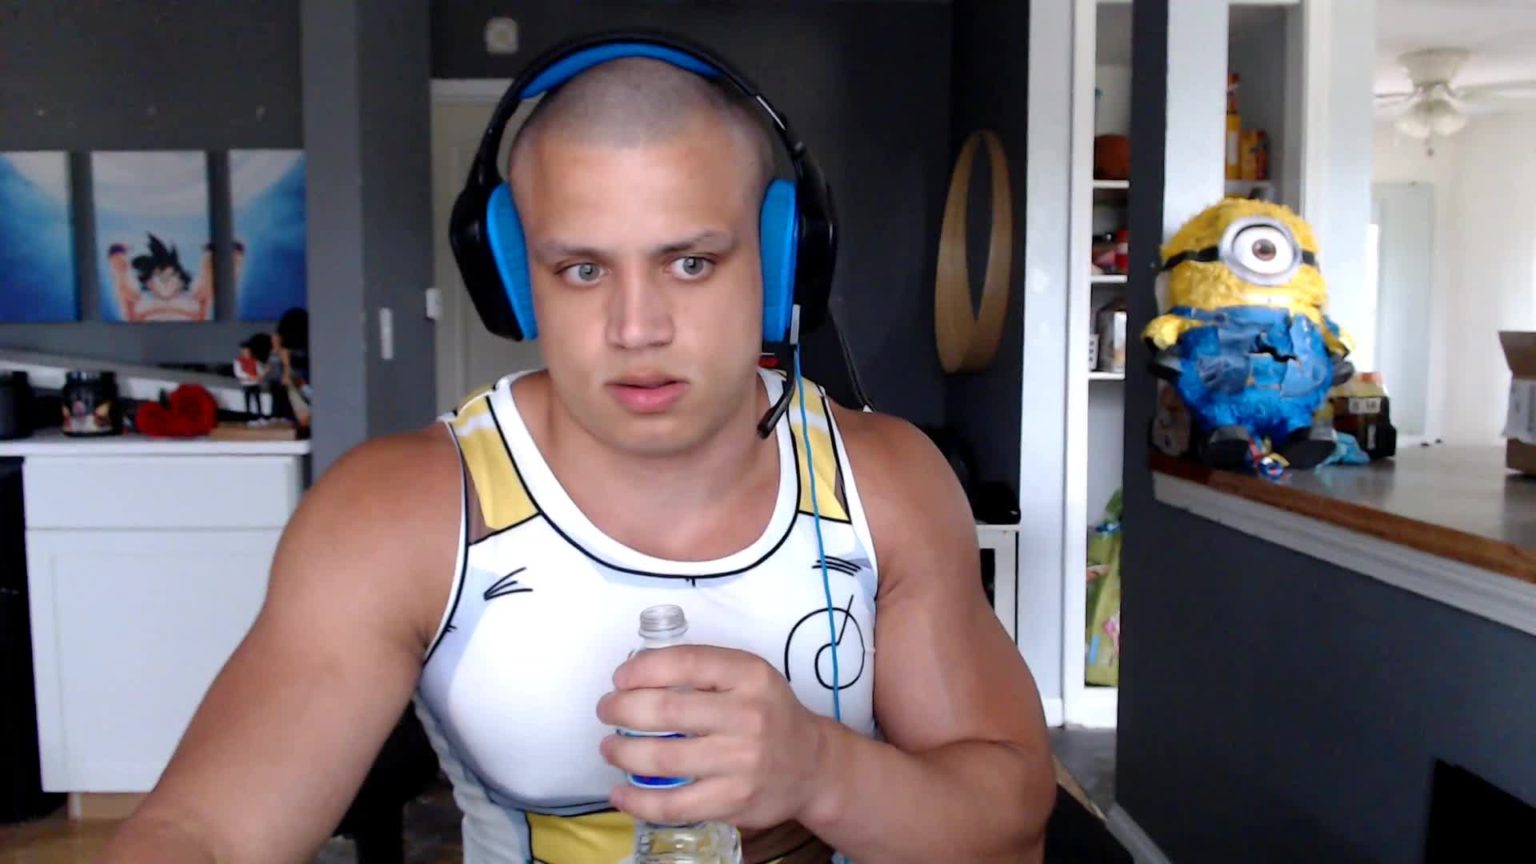 Somewhere in late 2017, Tyler1 announced that he had received an official e...